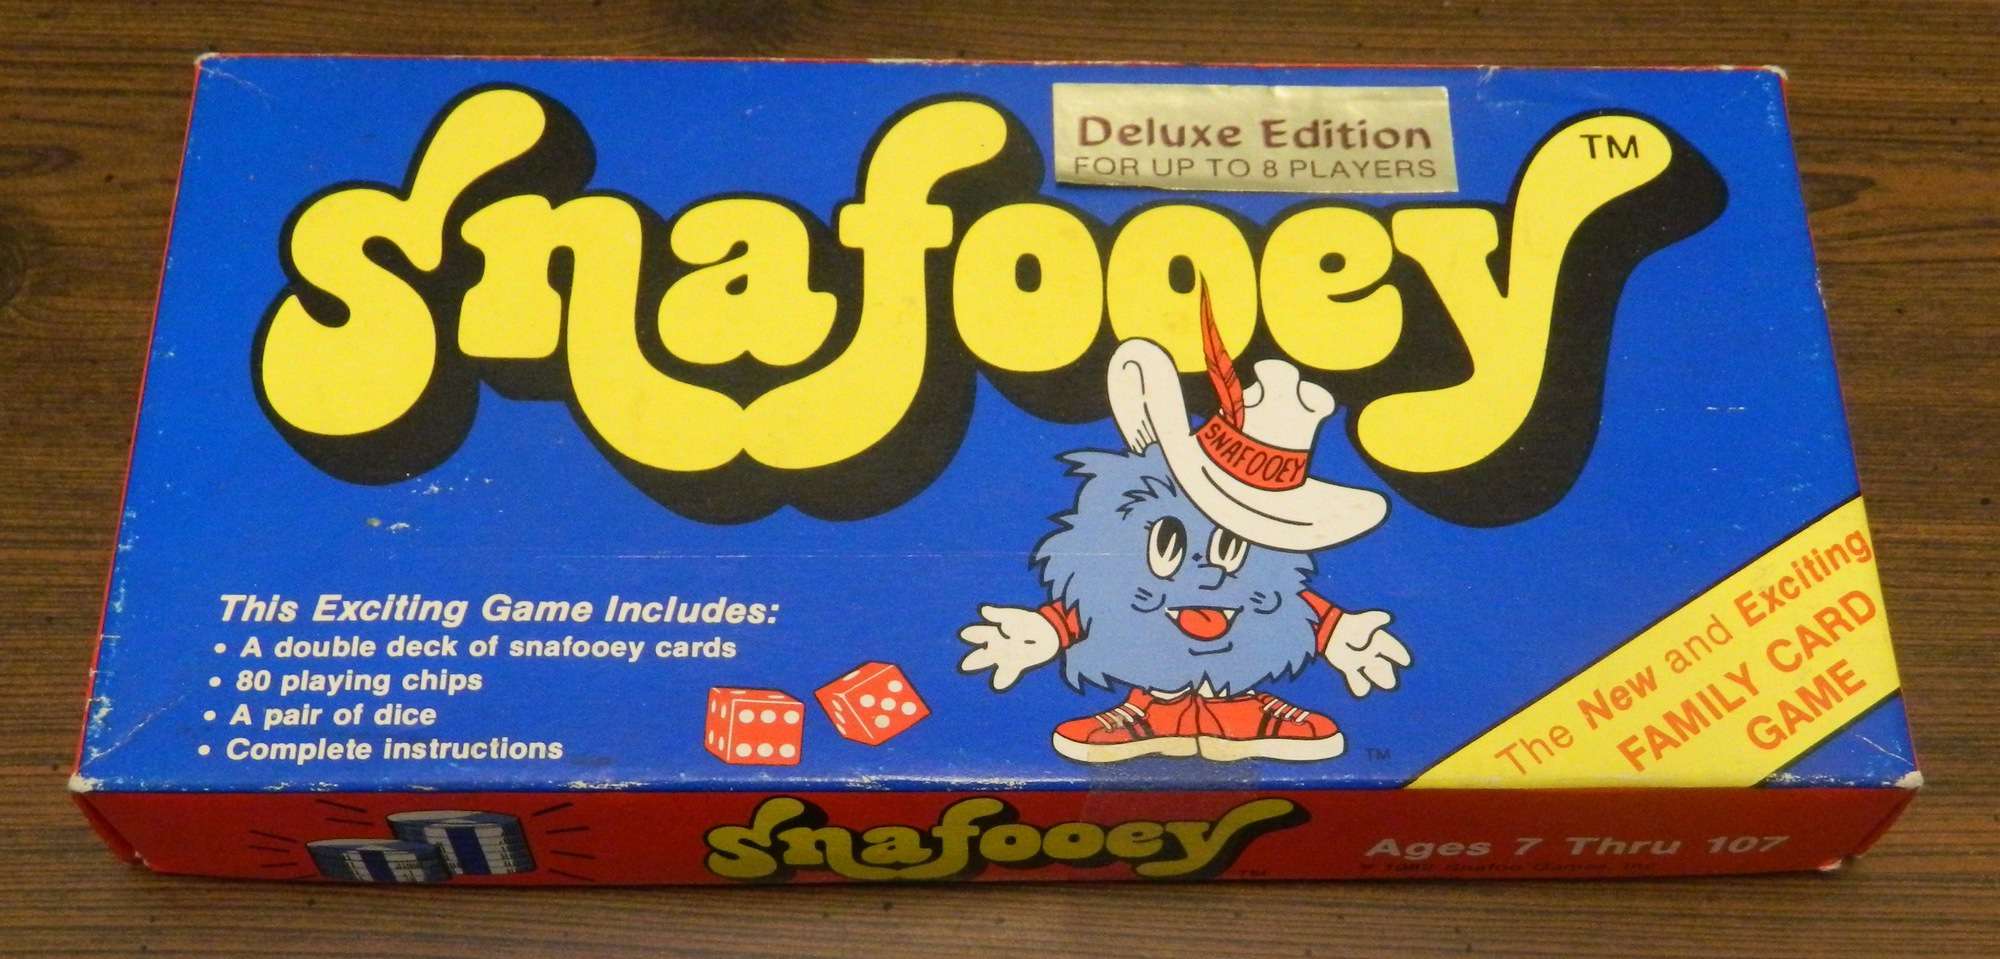 Box for Snafooey